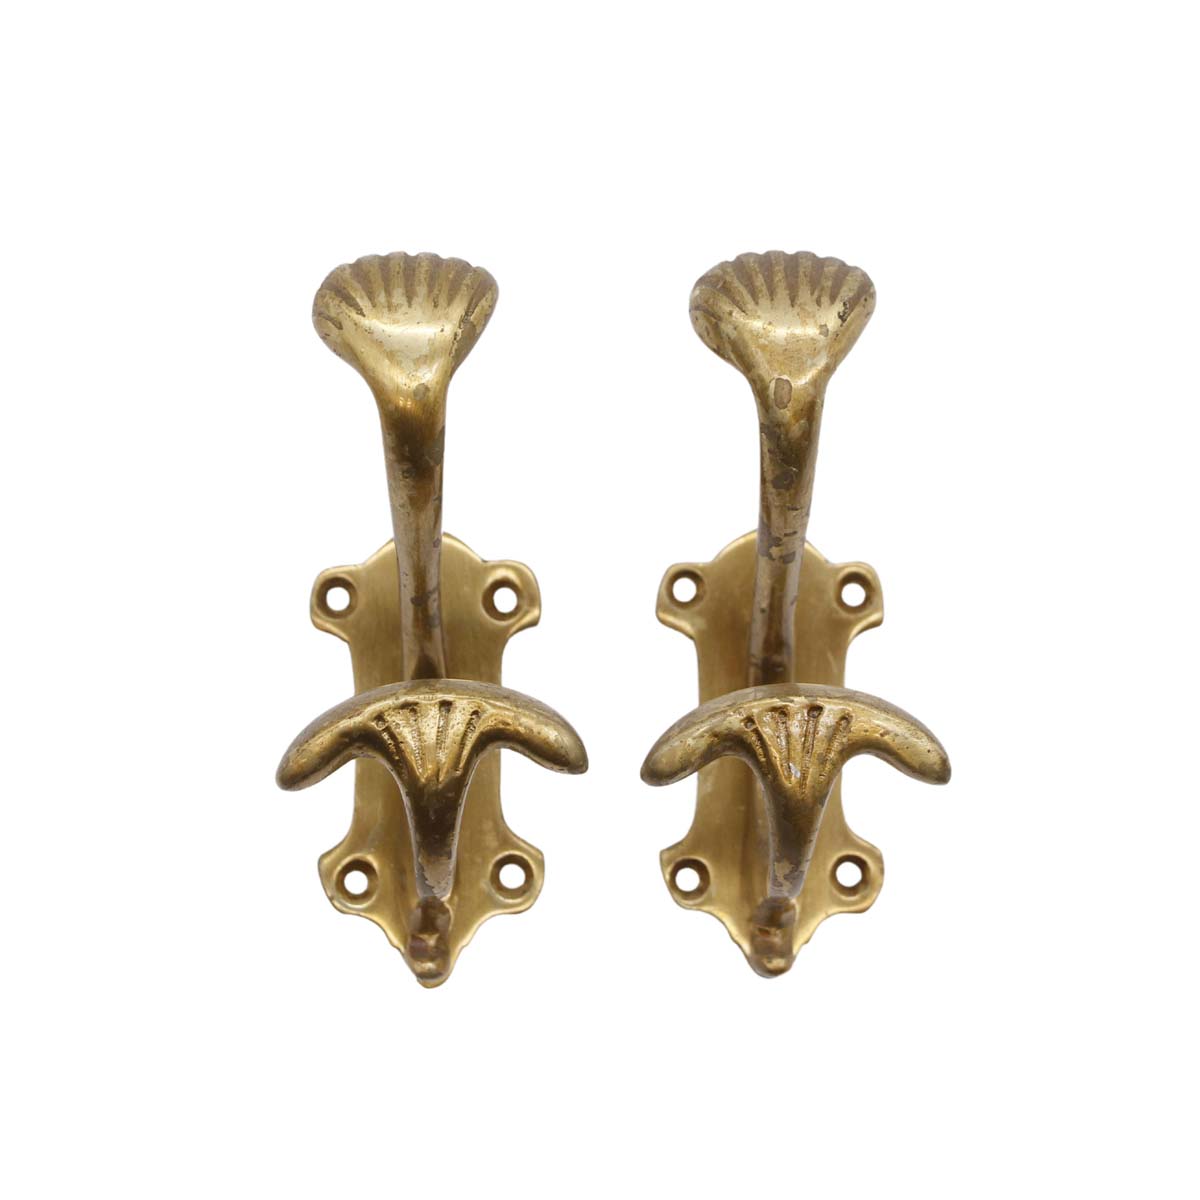 3 Pieces Brass Antique Wall Hooks for Hanging